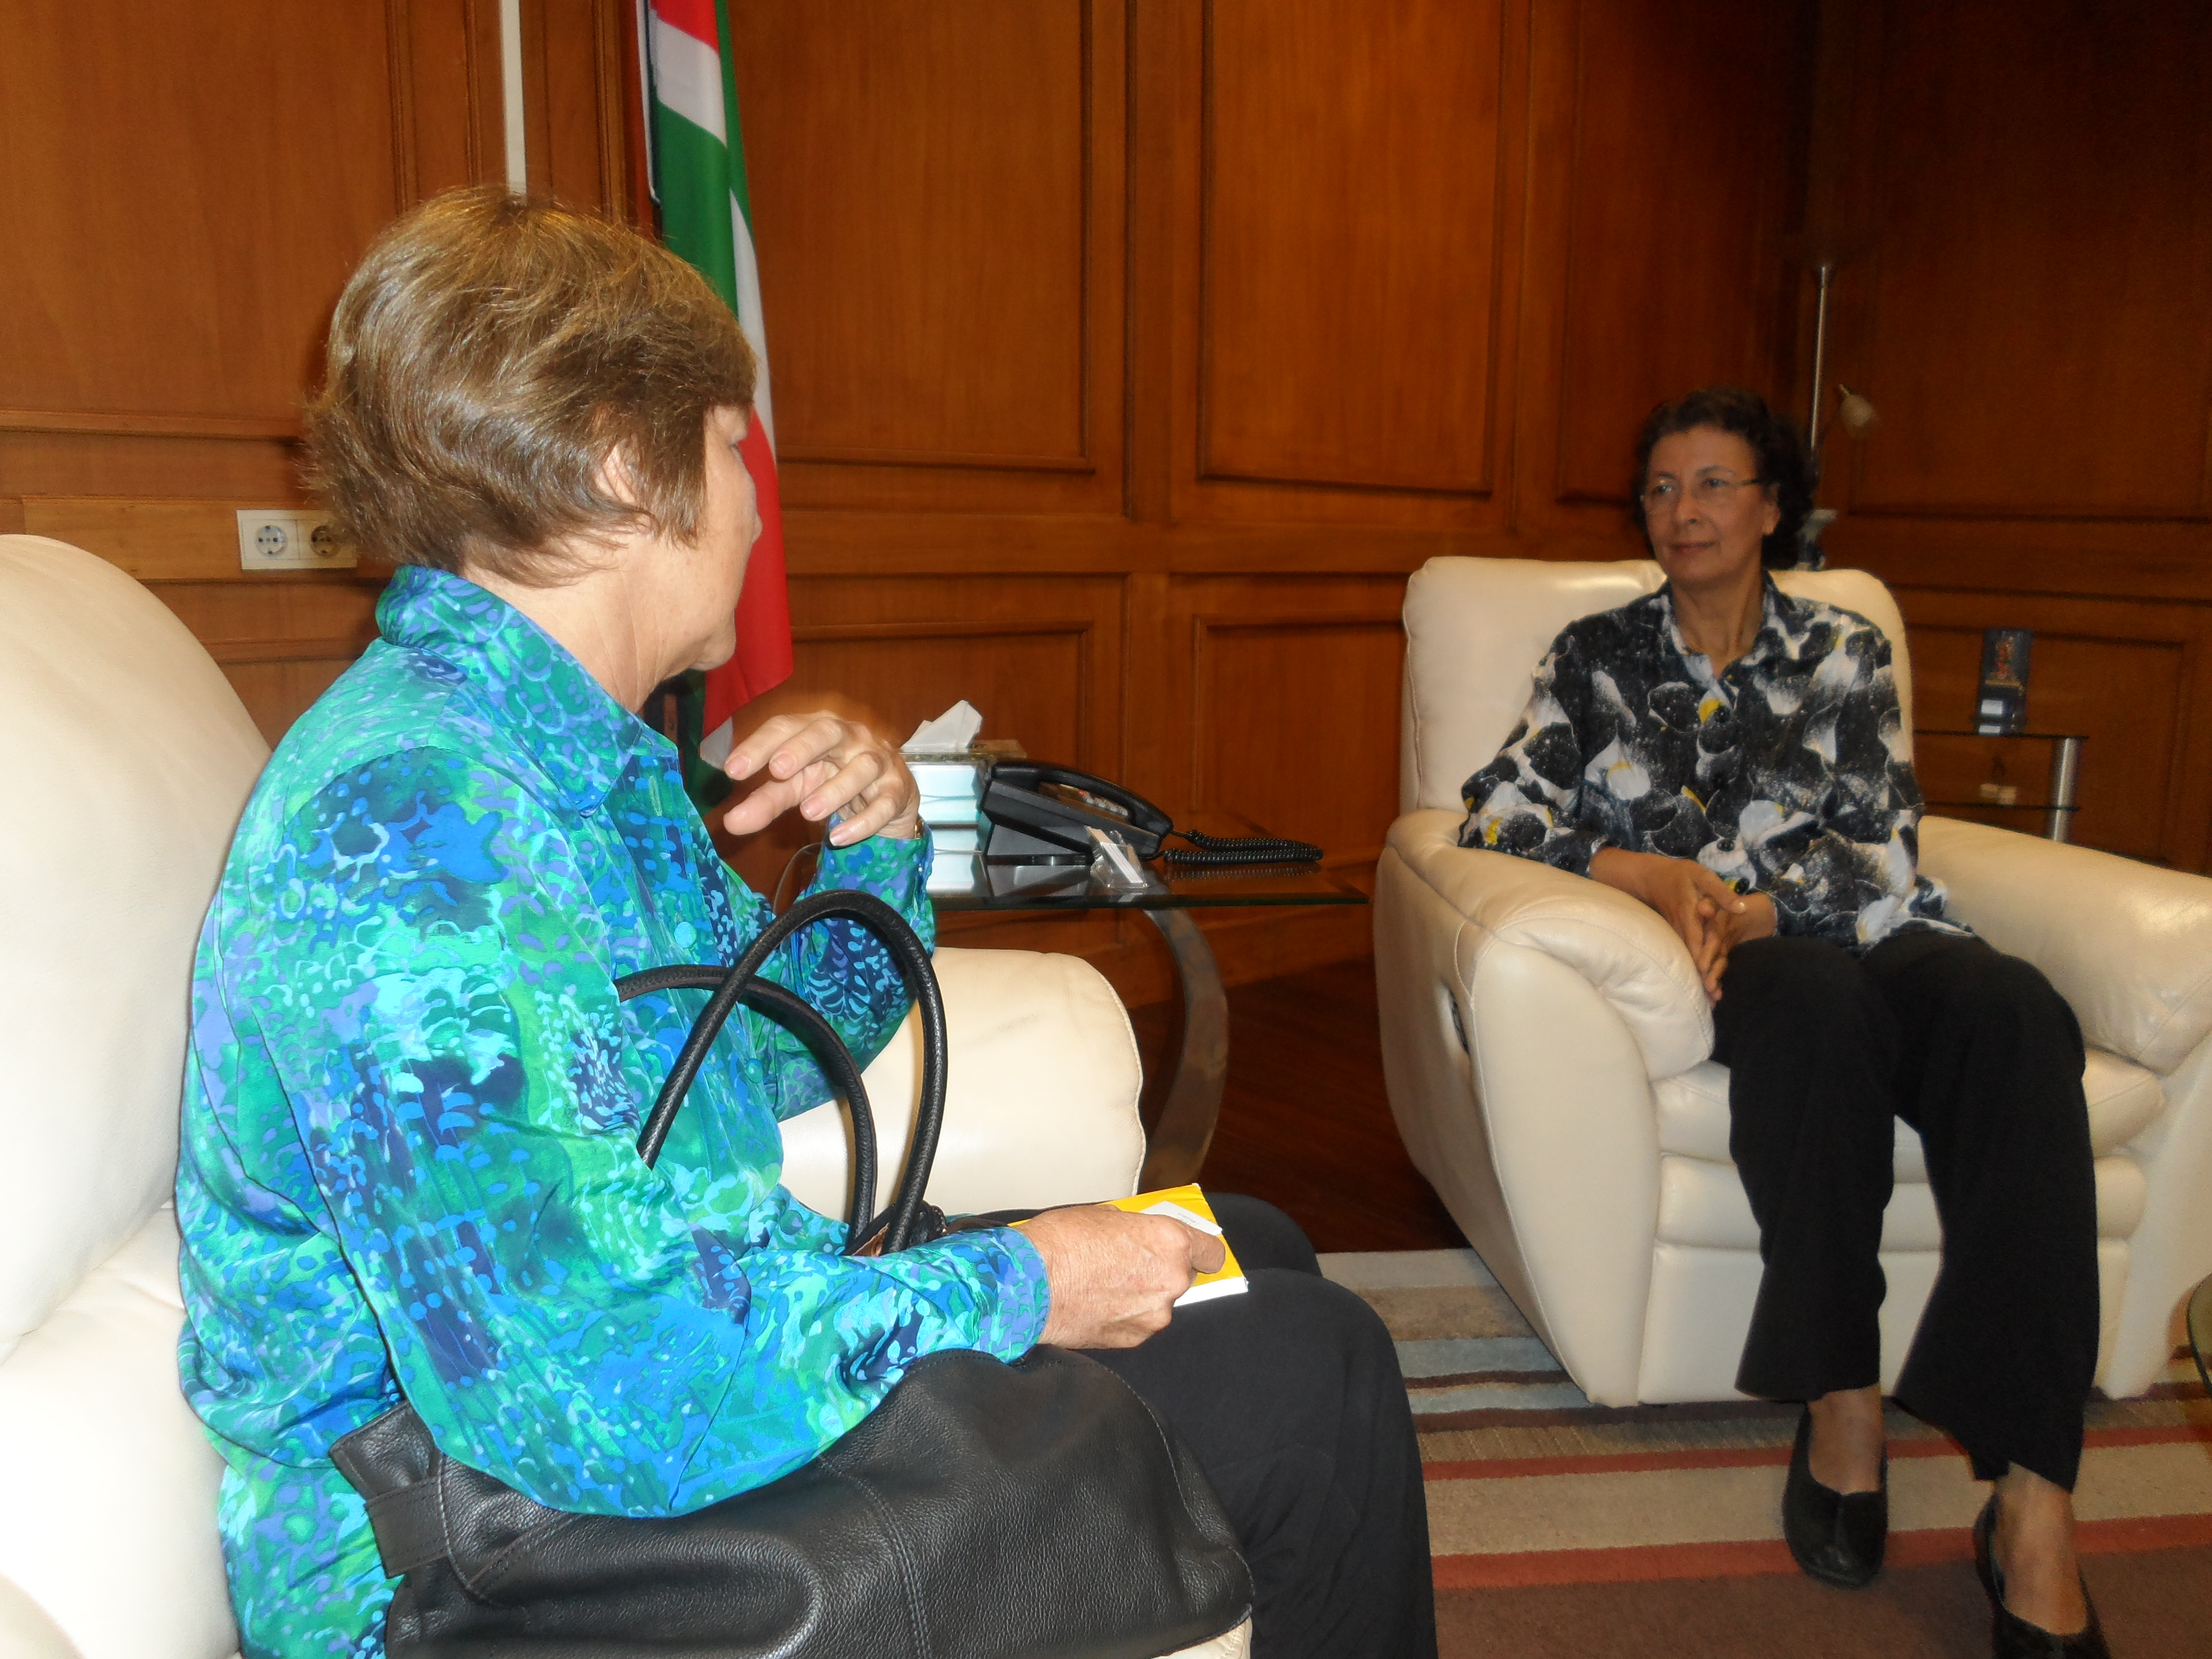 Dr. Nancy Robinson Meets the Speaker of the House H.E. J. Geerlings-Simons(March 4, 2015)